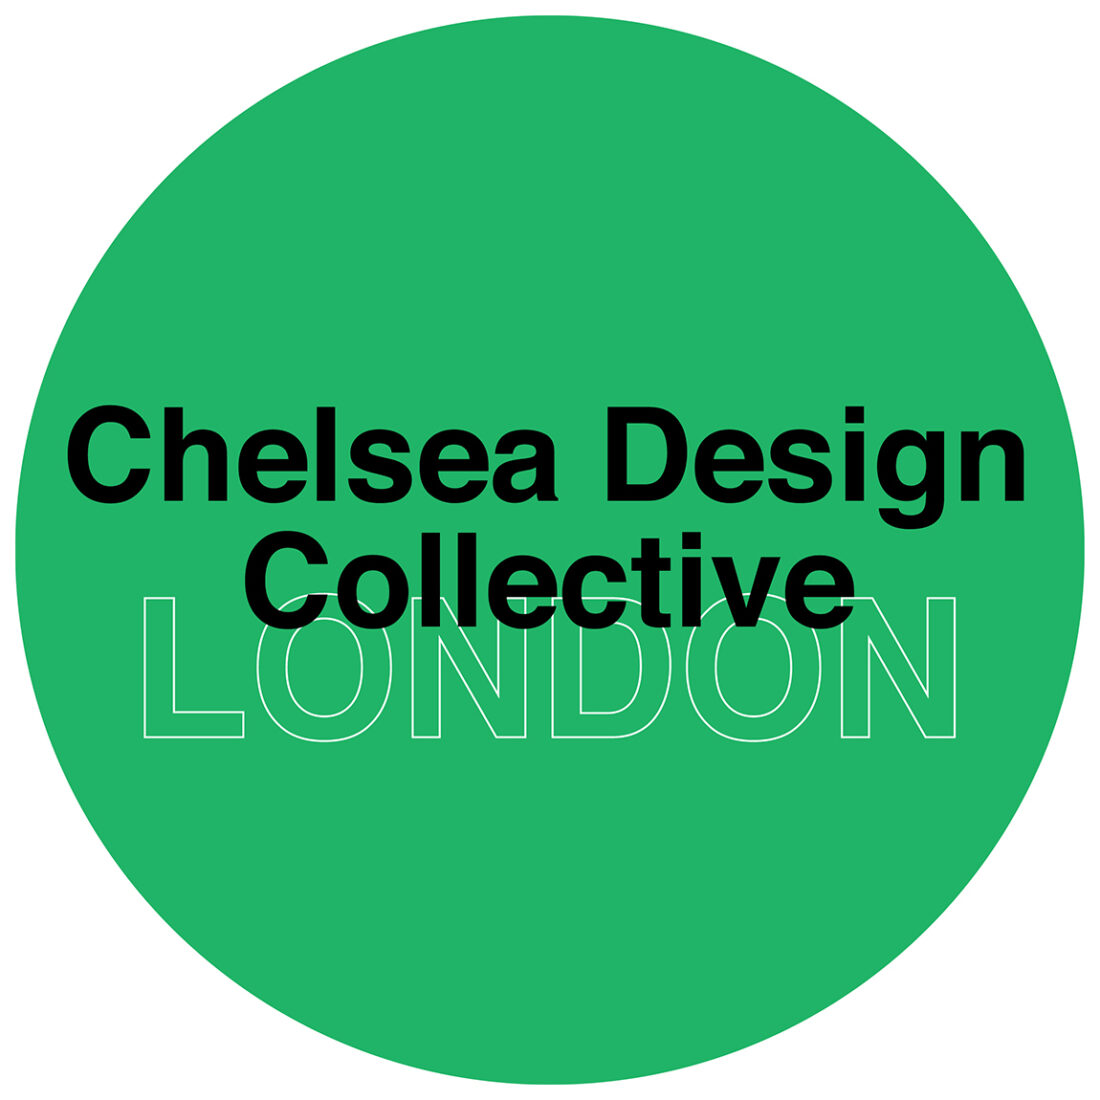 We are incredibly proud to support and collaborate with The Chelsea Design Collective. Click to find out more about what's on in Chelsea.